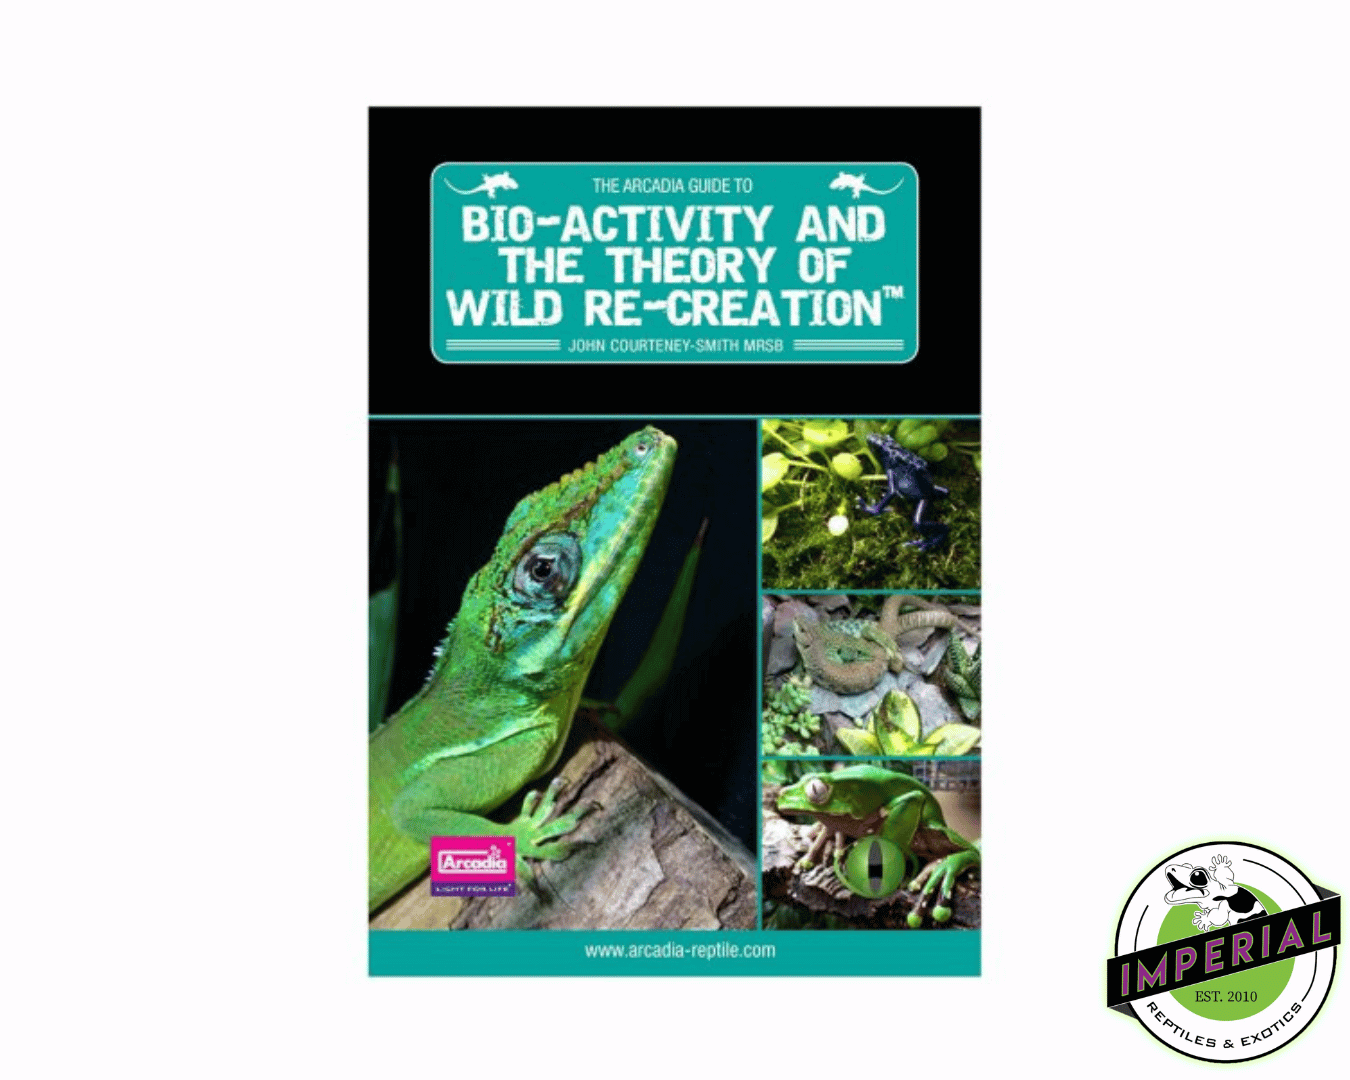 The Arcadia Guide to Bio-Activity and the Theory of Wild Re-Creation